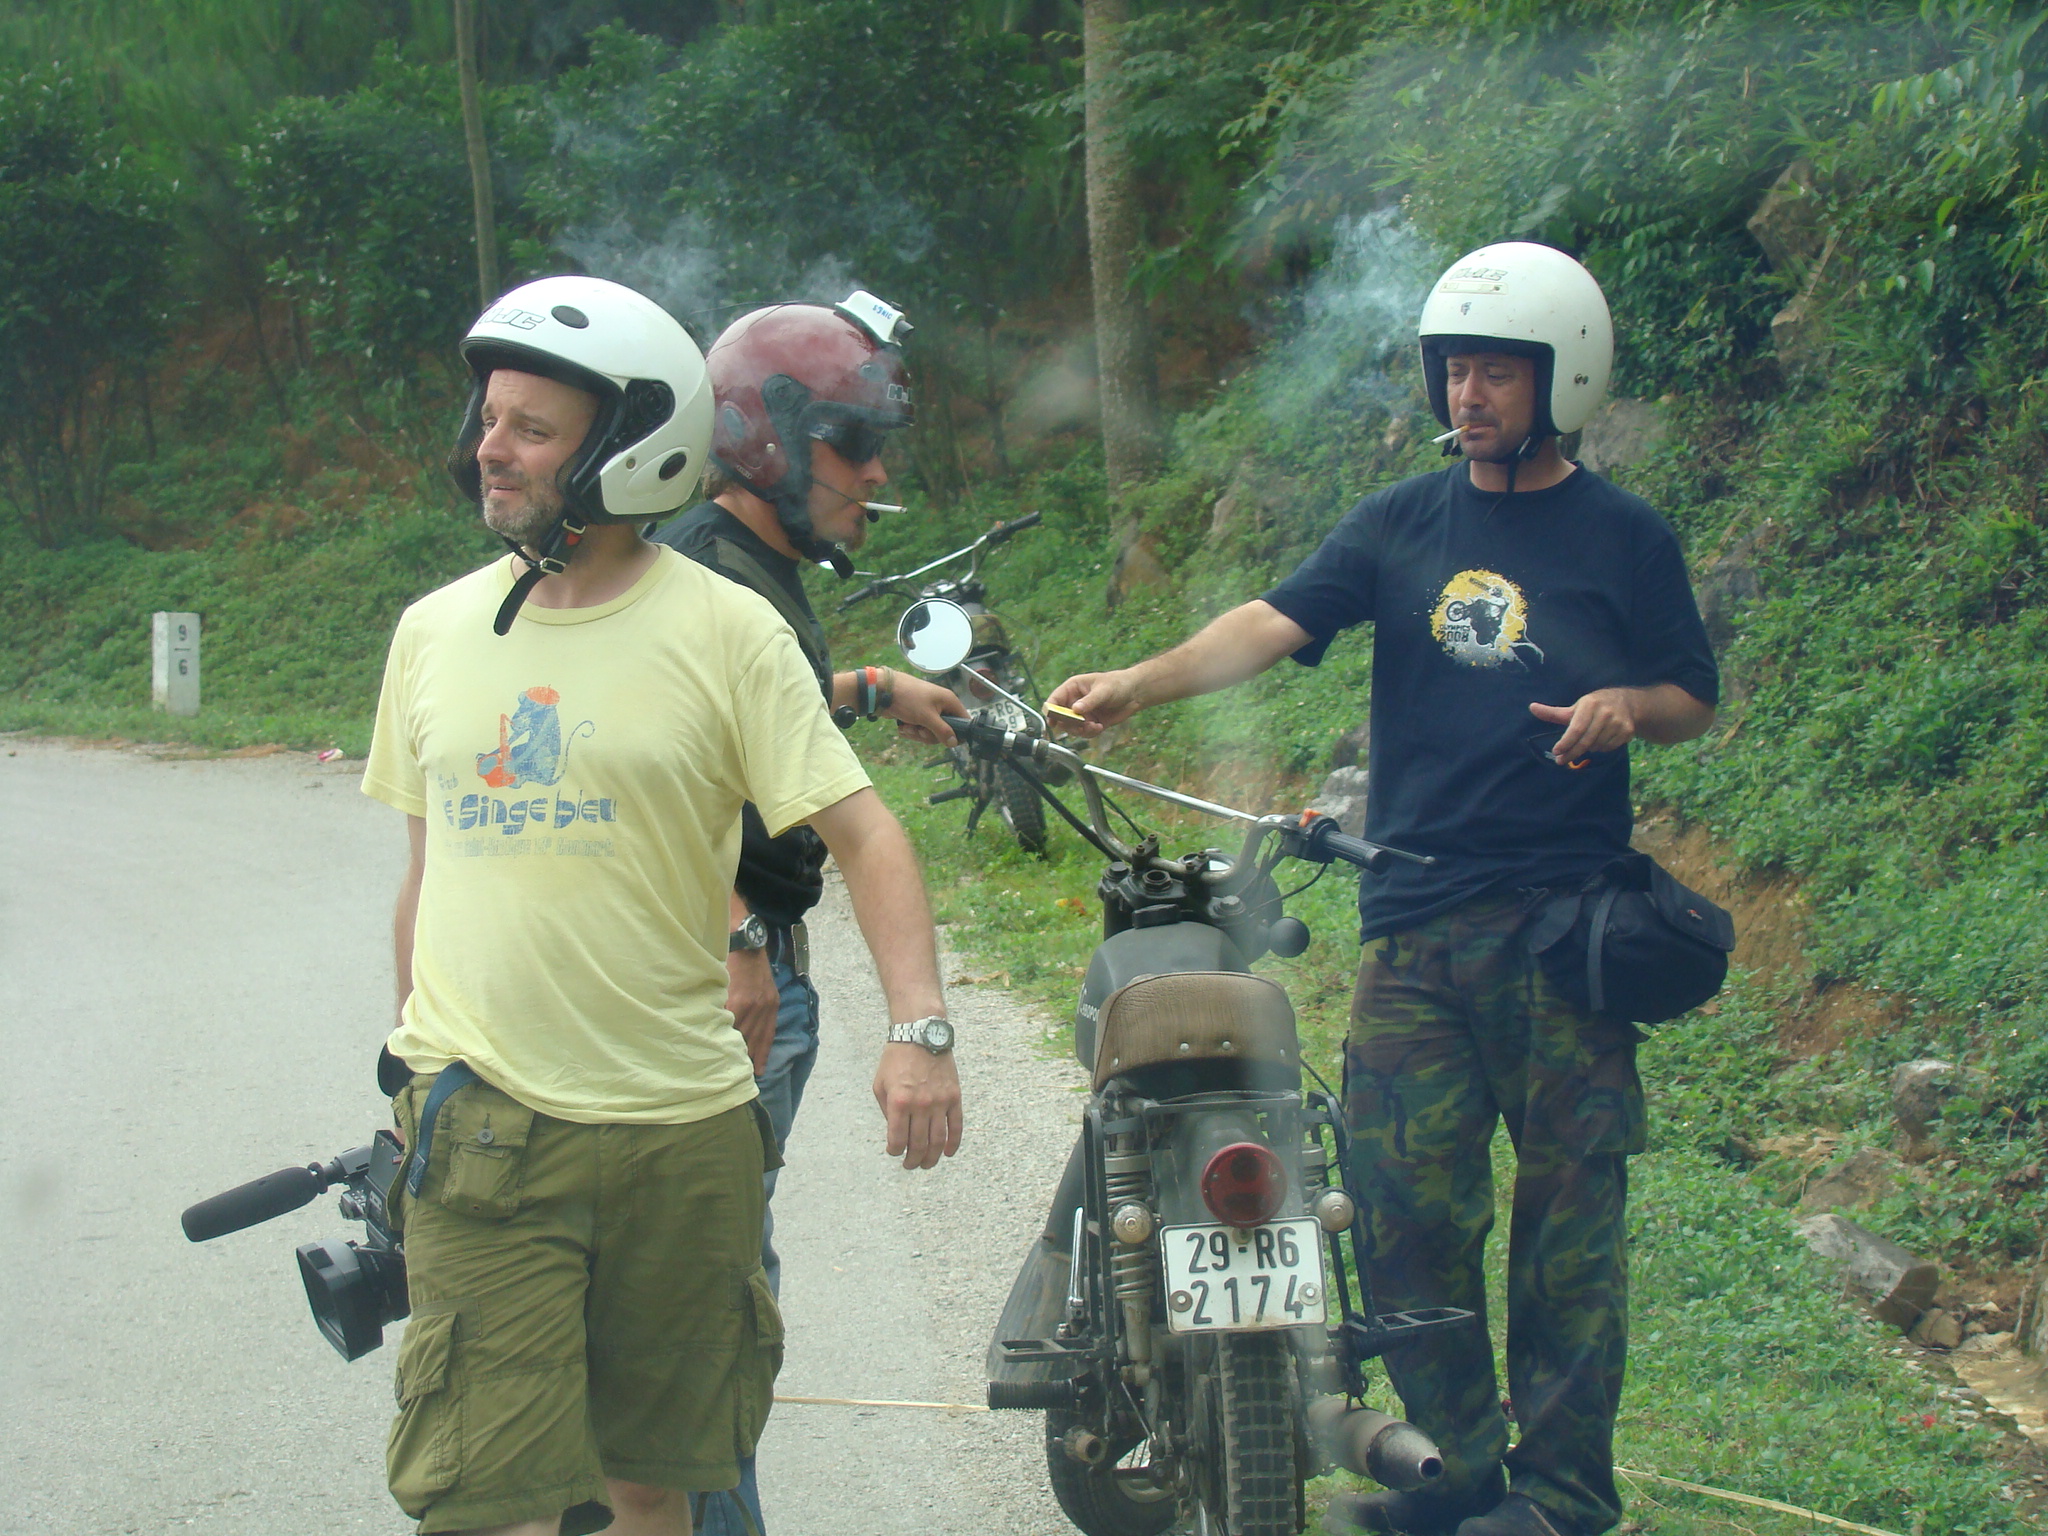 Charlie Boorman and Digby Greenhalgh share a smoke